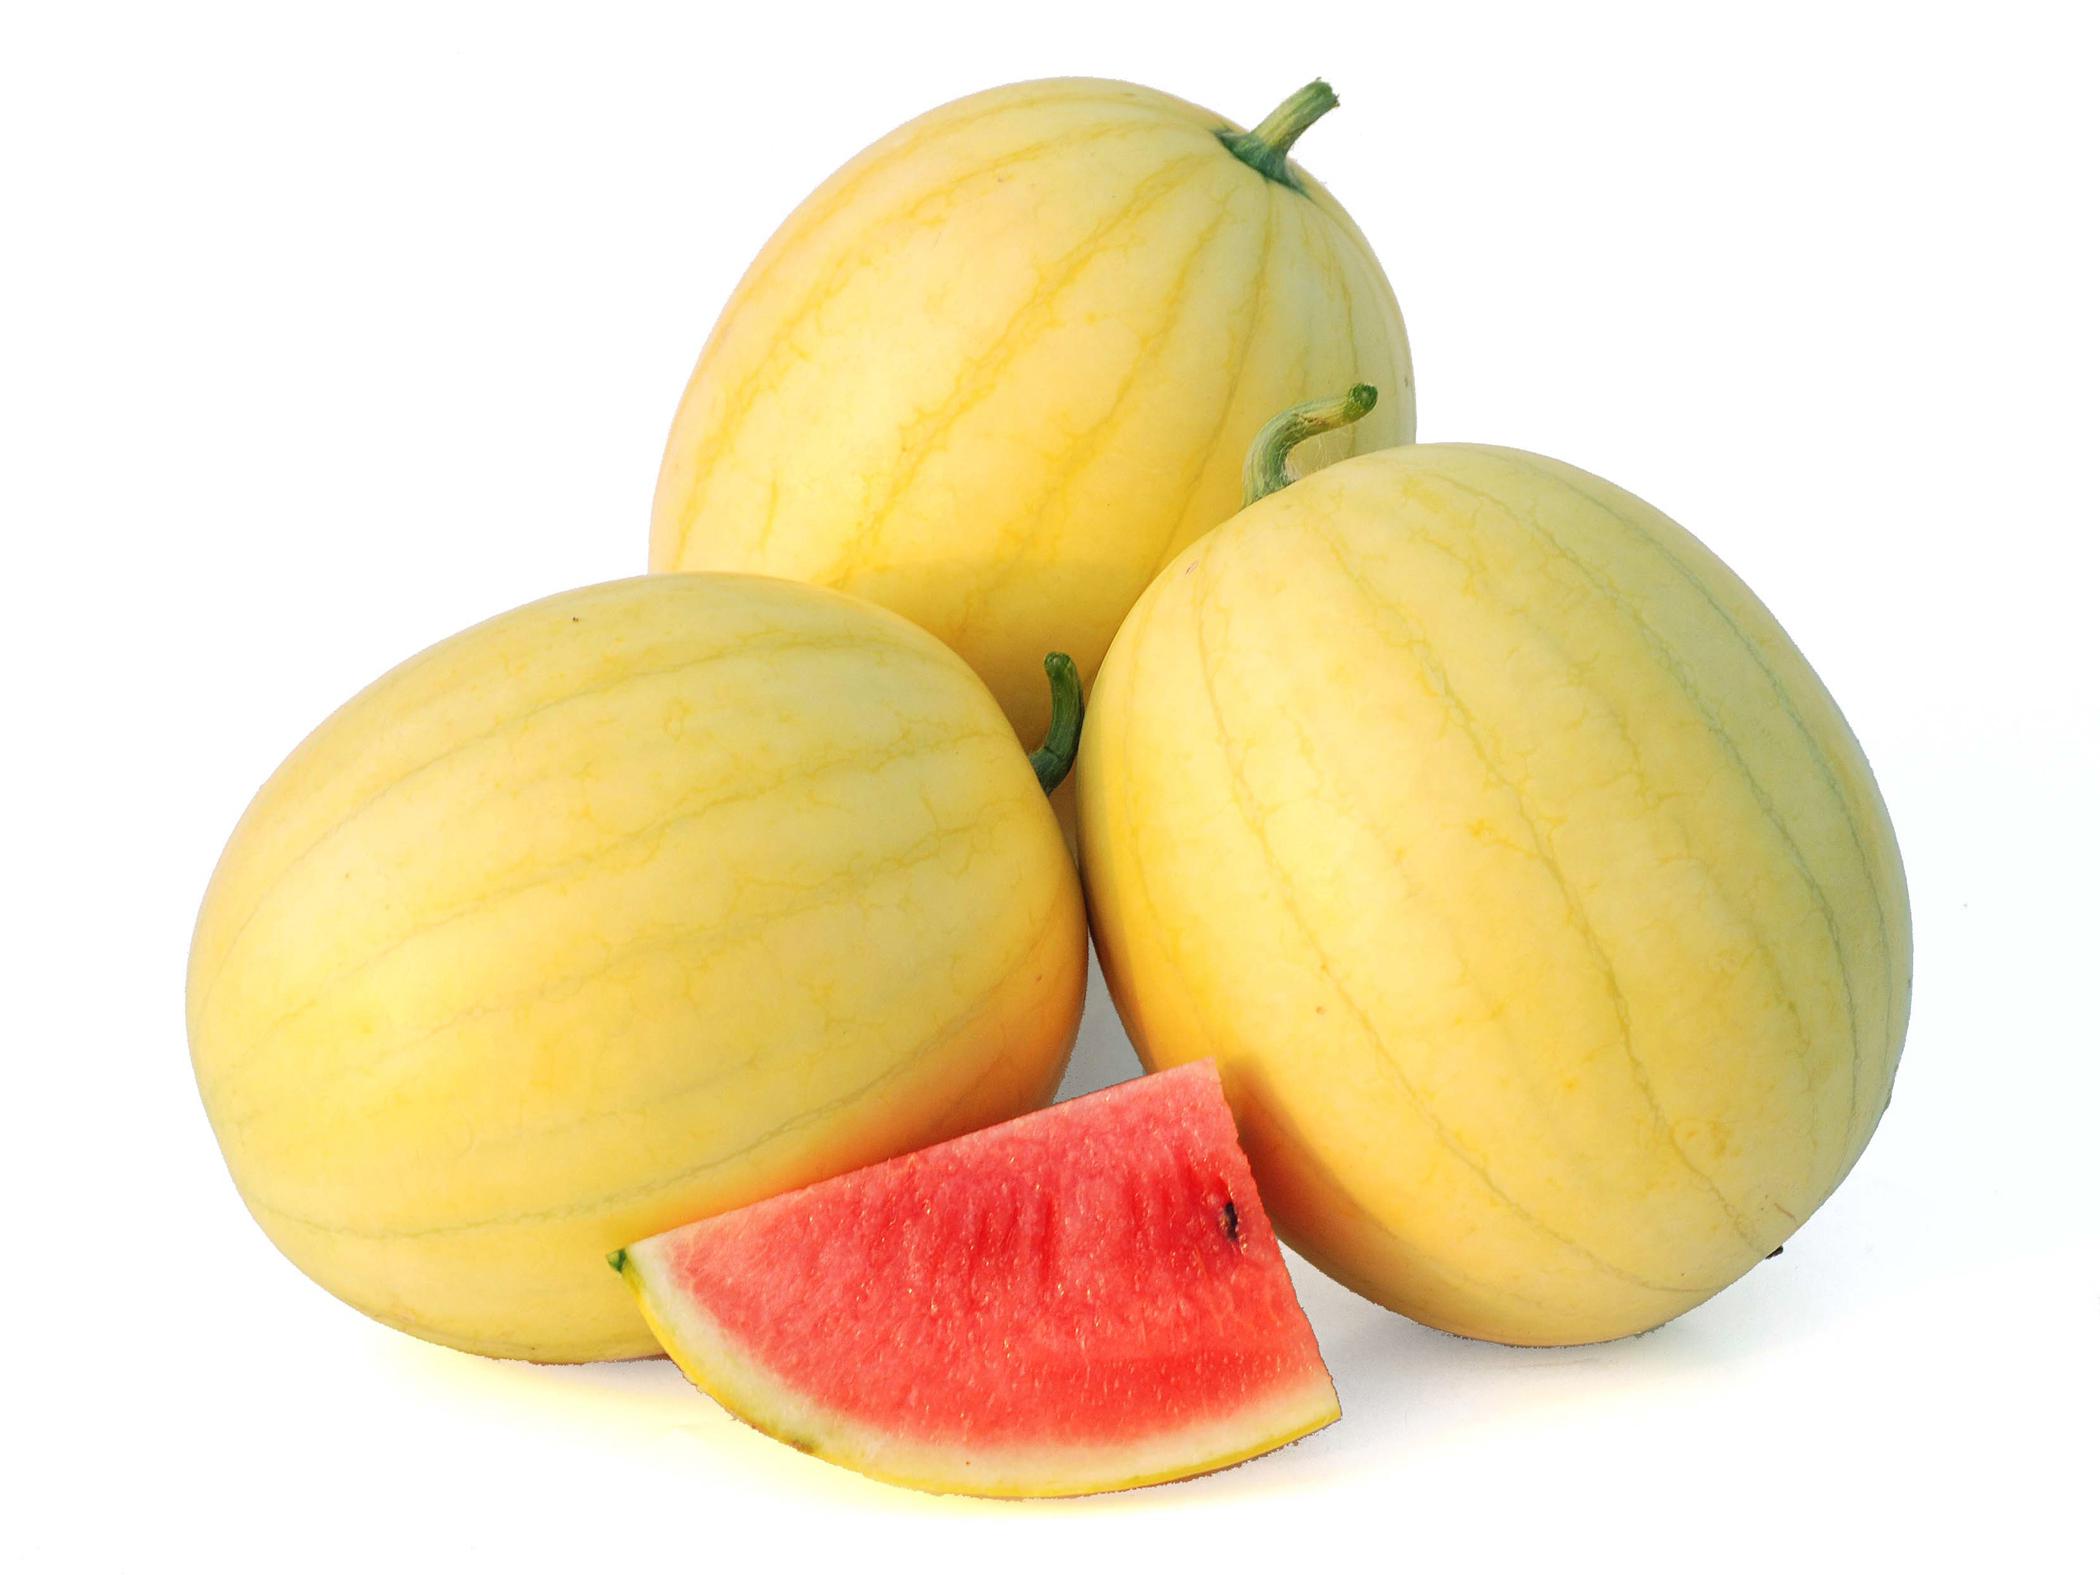 The non-traditional "Faerie" F1 watermelon, with its yellow rind and sweet, red flesh, is a 2012 All-America Selection Vegetable Award winner. (Photo courtesy of All-America Selections)